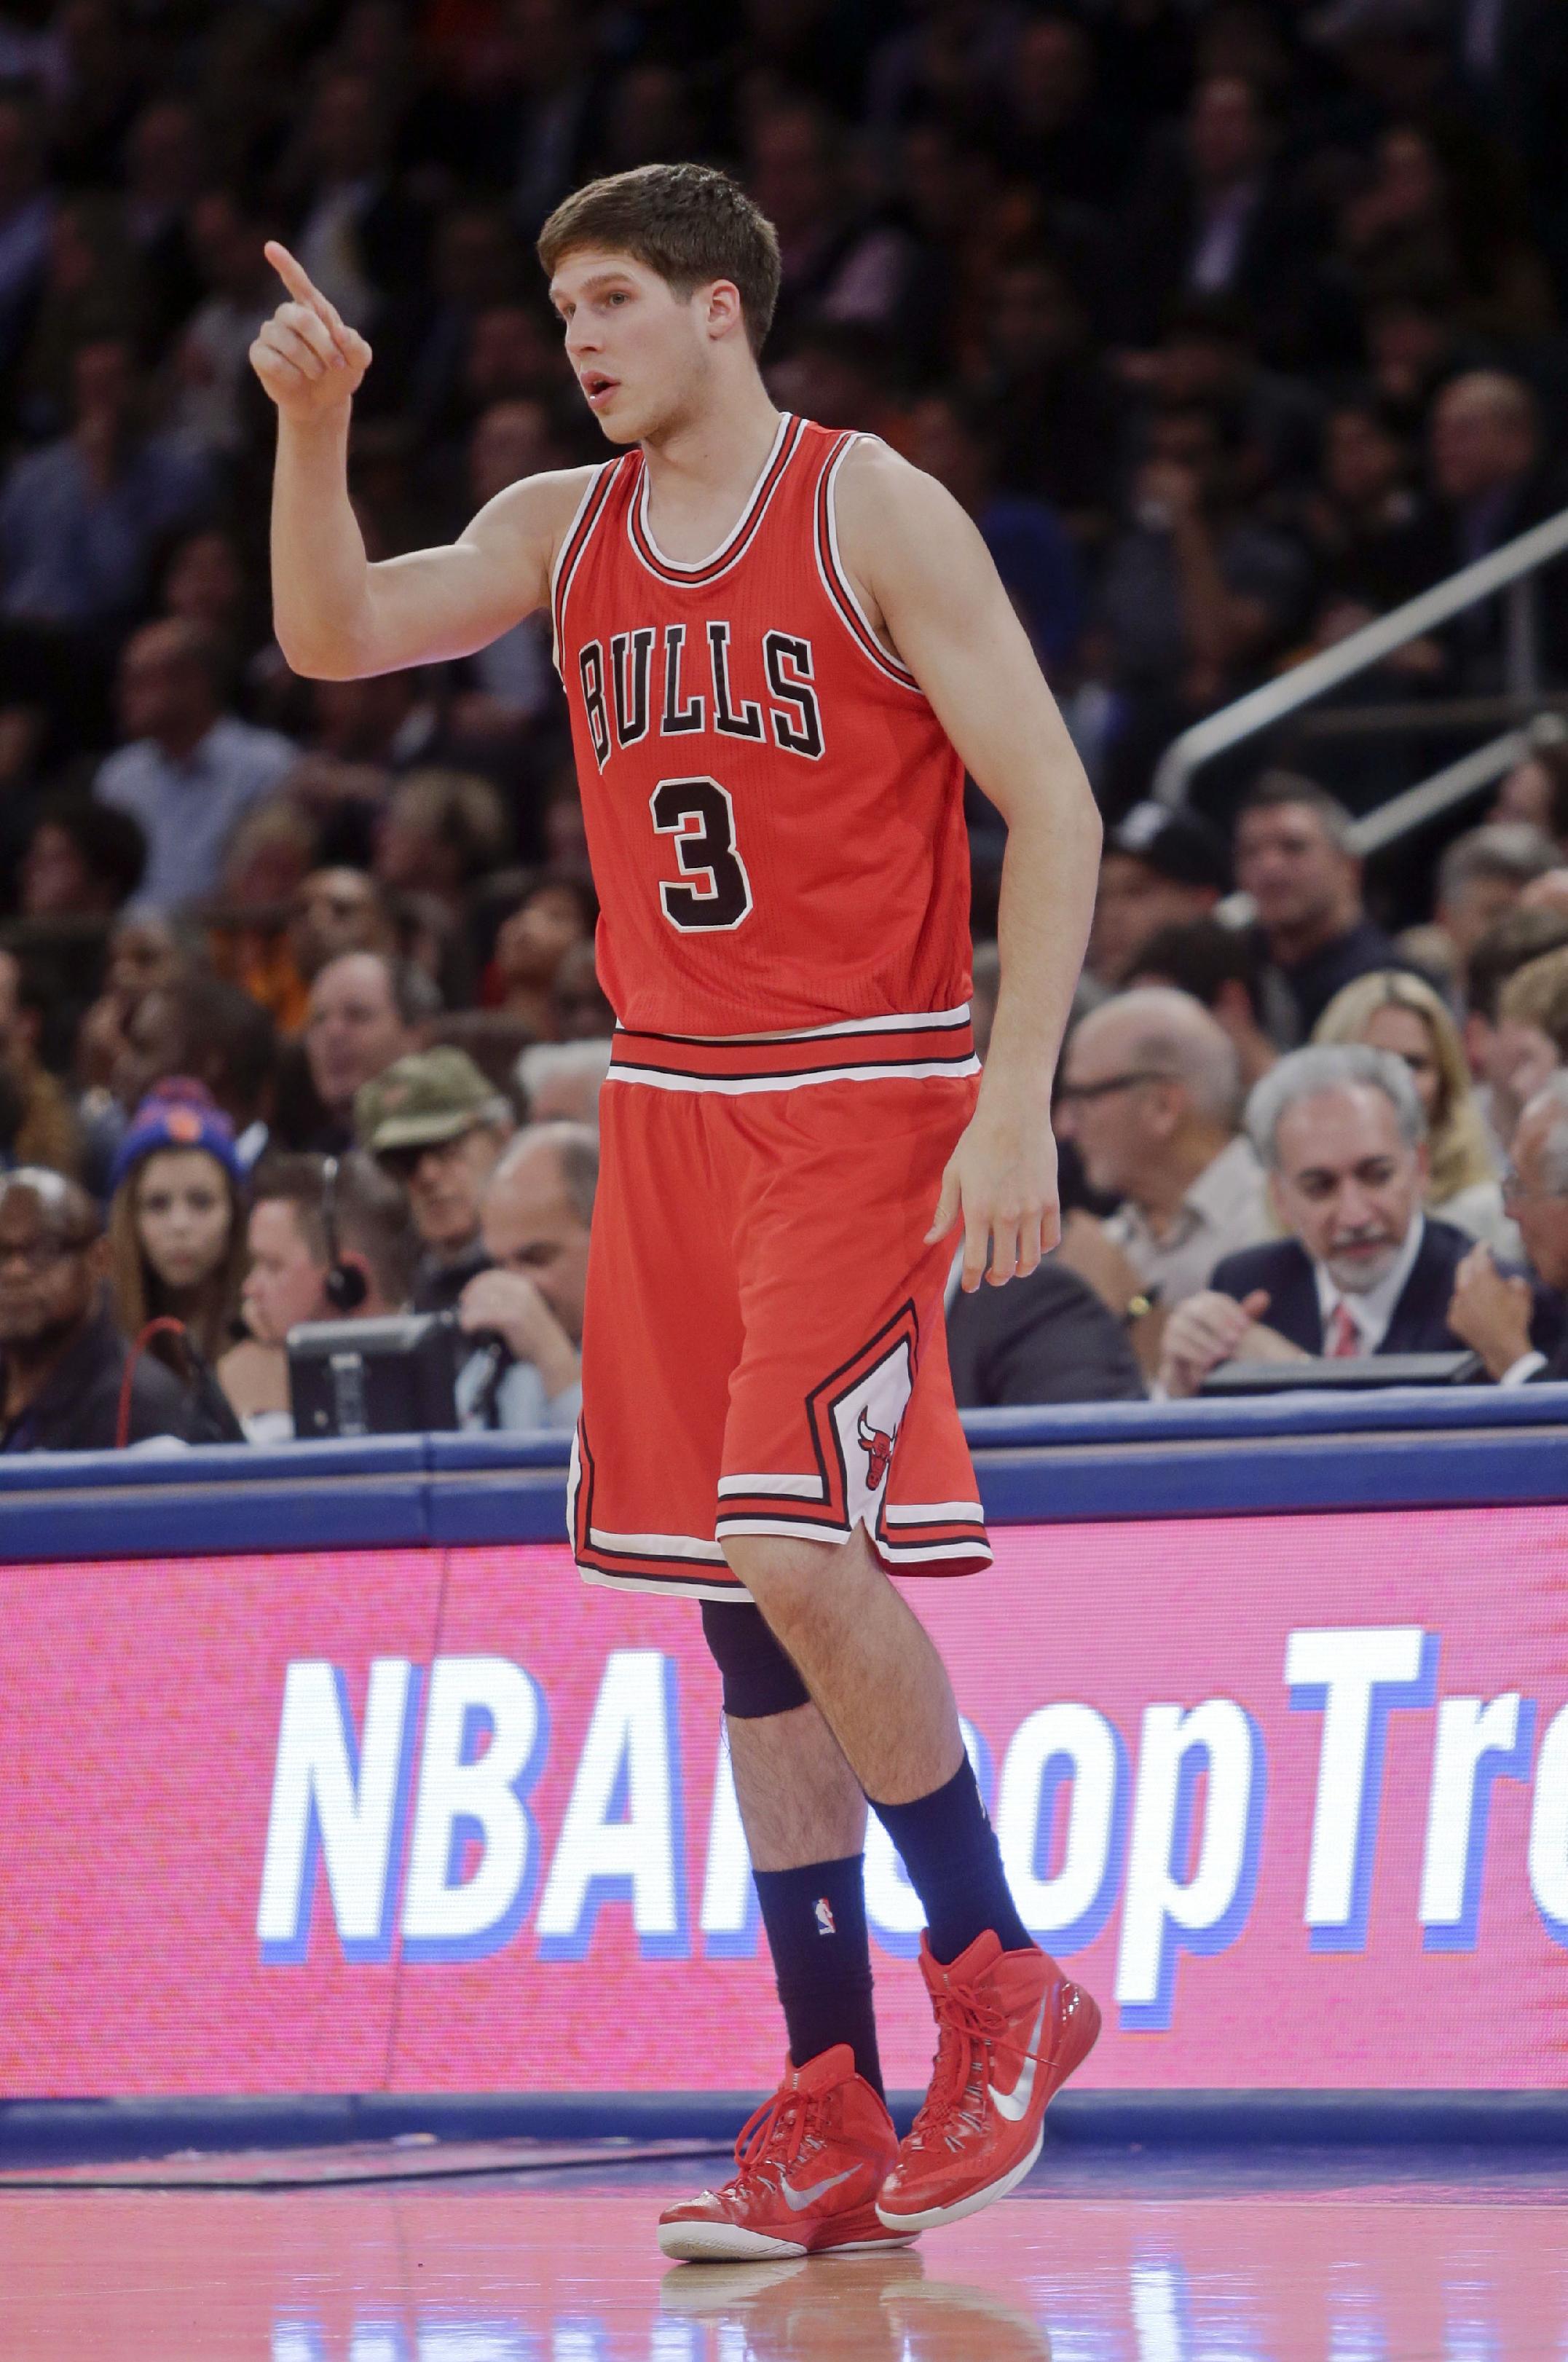 Chicago Bulls' Doug McDermott gestures to a teammate during the first half of an NBA basketball game against the New York Knicks, Wednesday, Oct. 29, 2014, in New York. (AP Photo/Frank Franklin II)